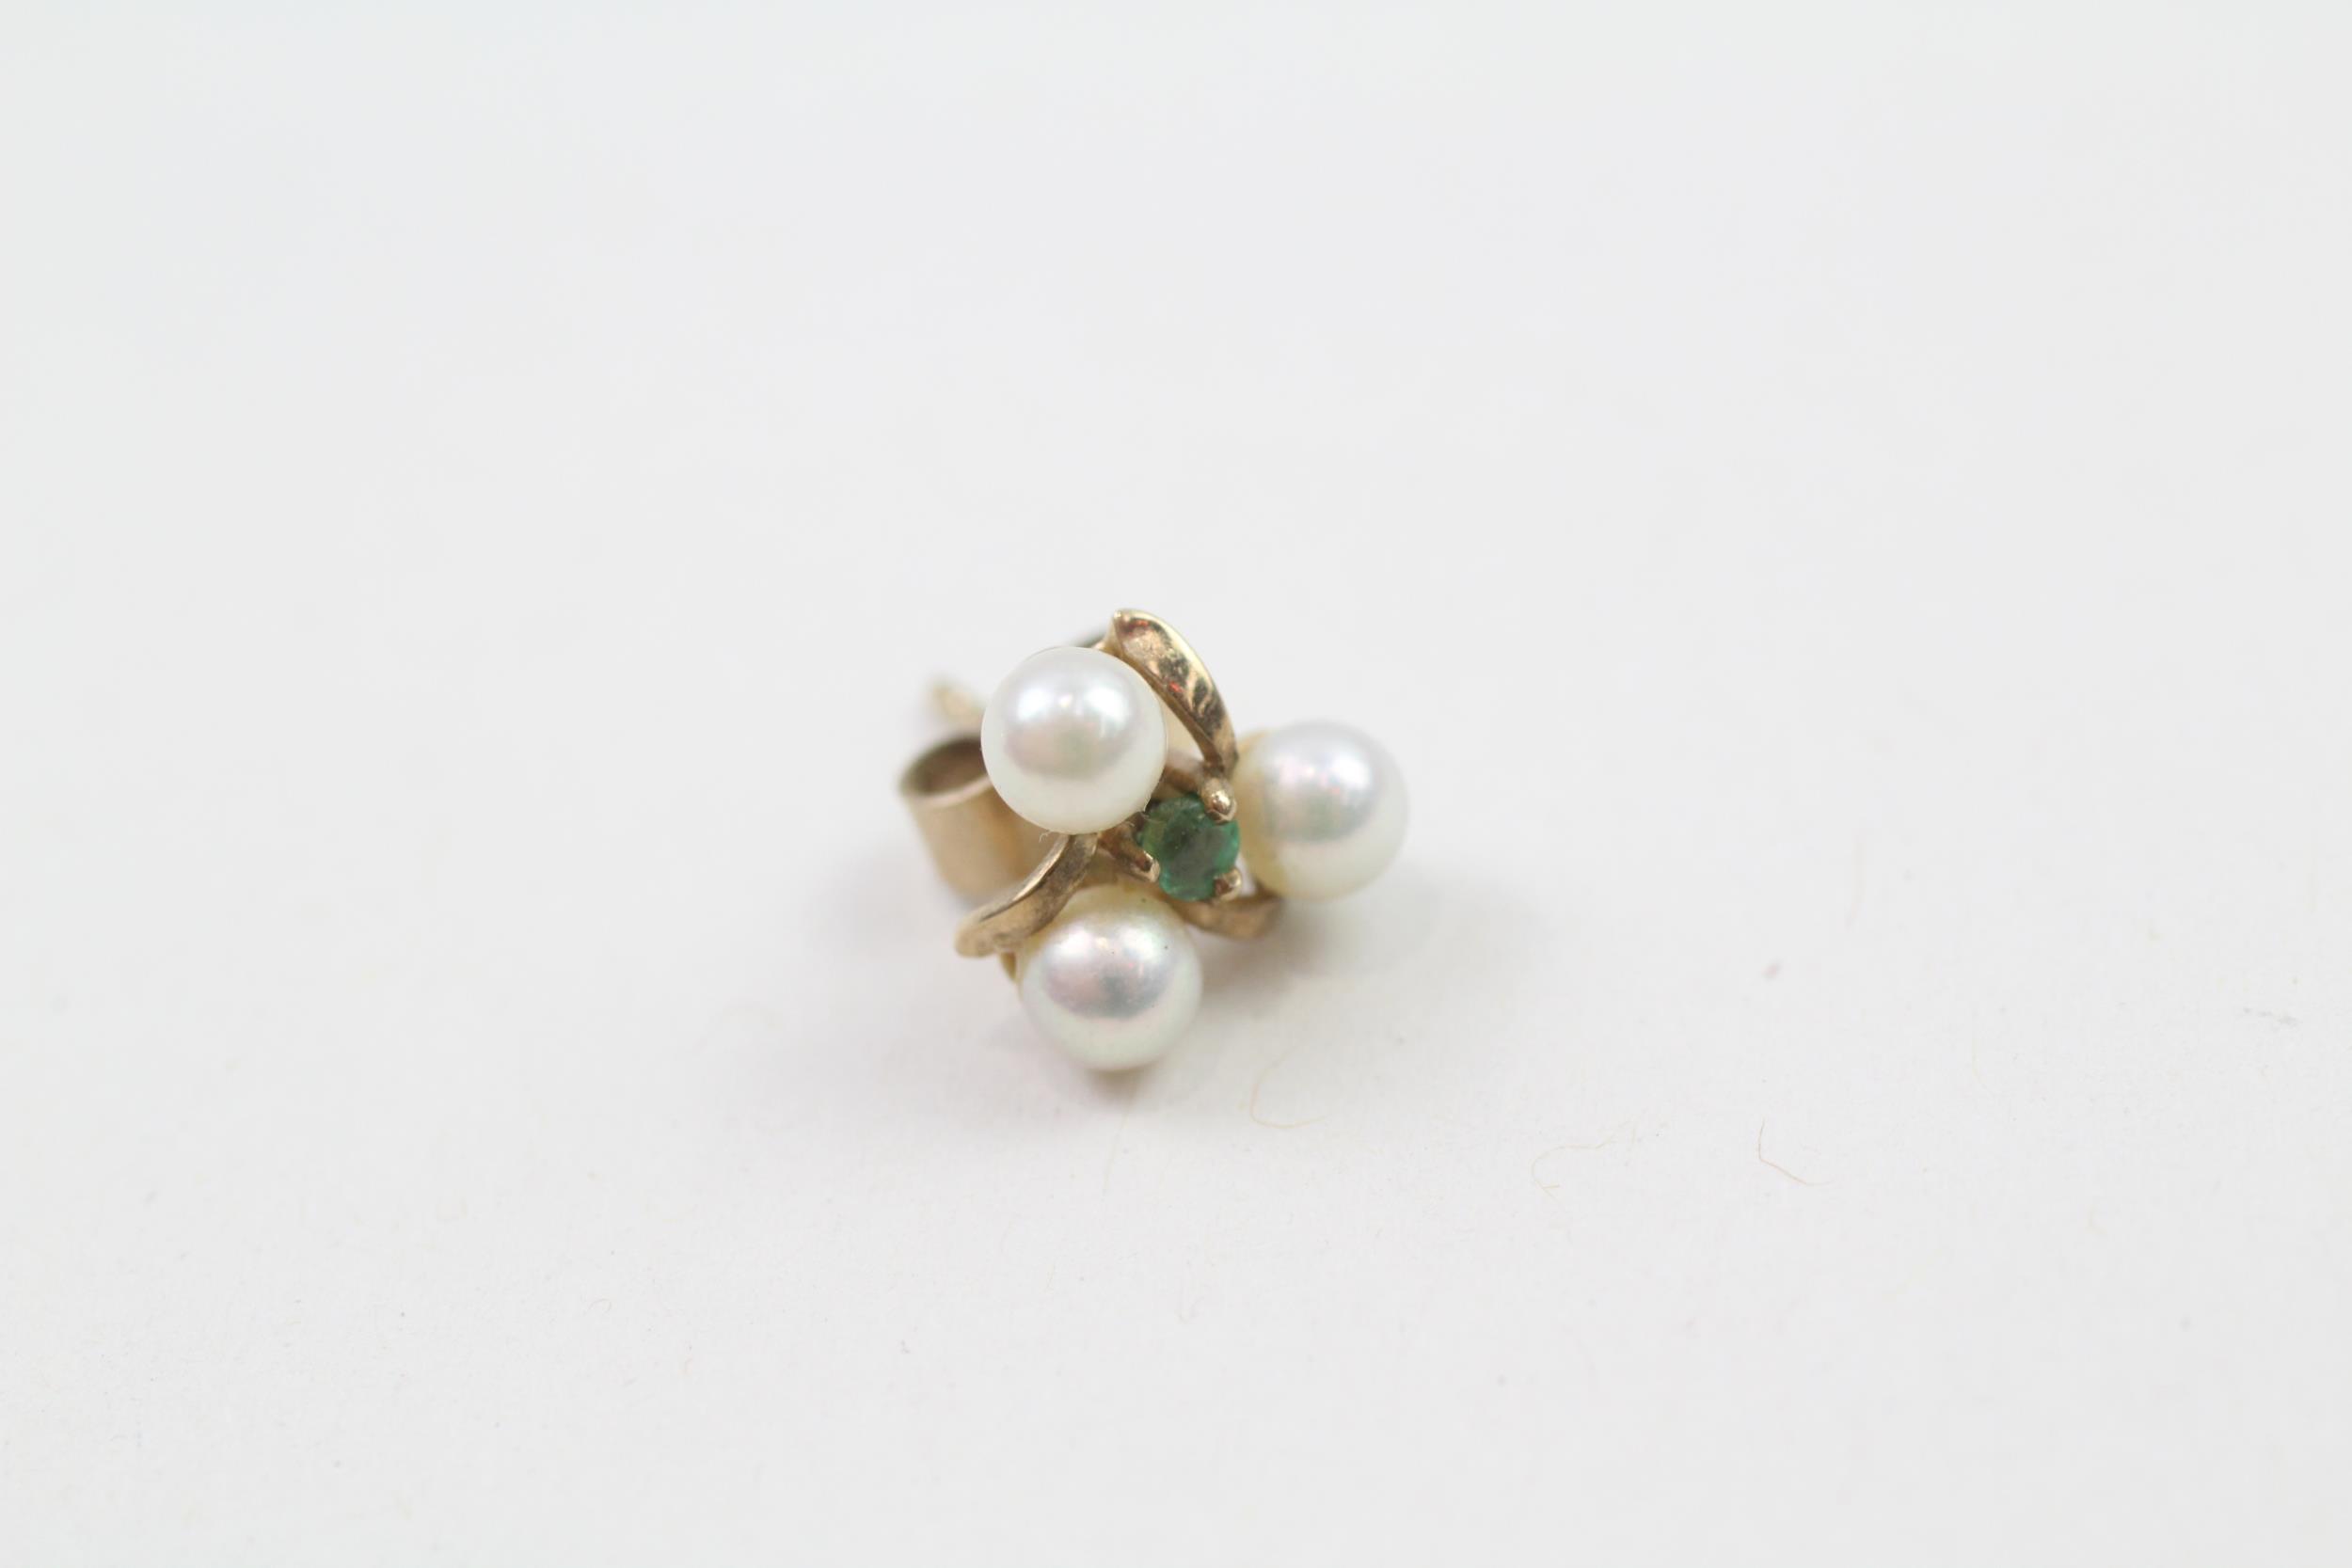 9ct gold emerald & cultured pearl cluster stud earrings (1.5g) - Image 4 of 5